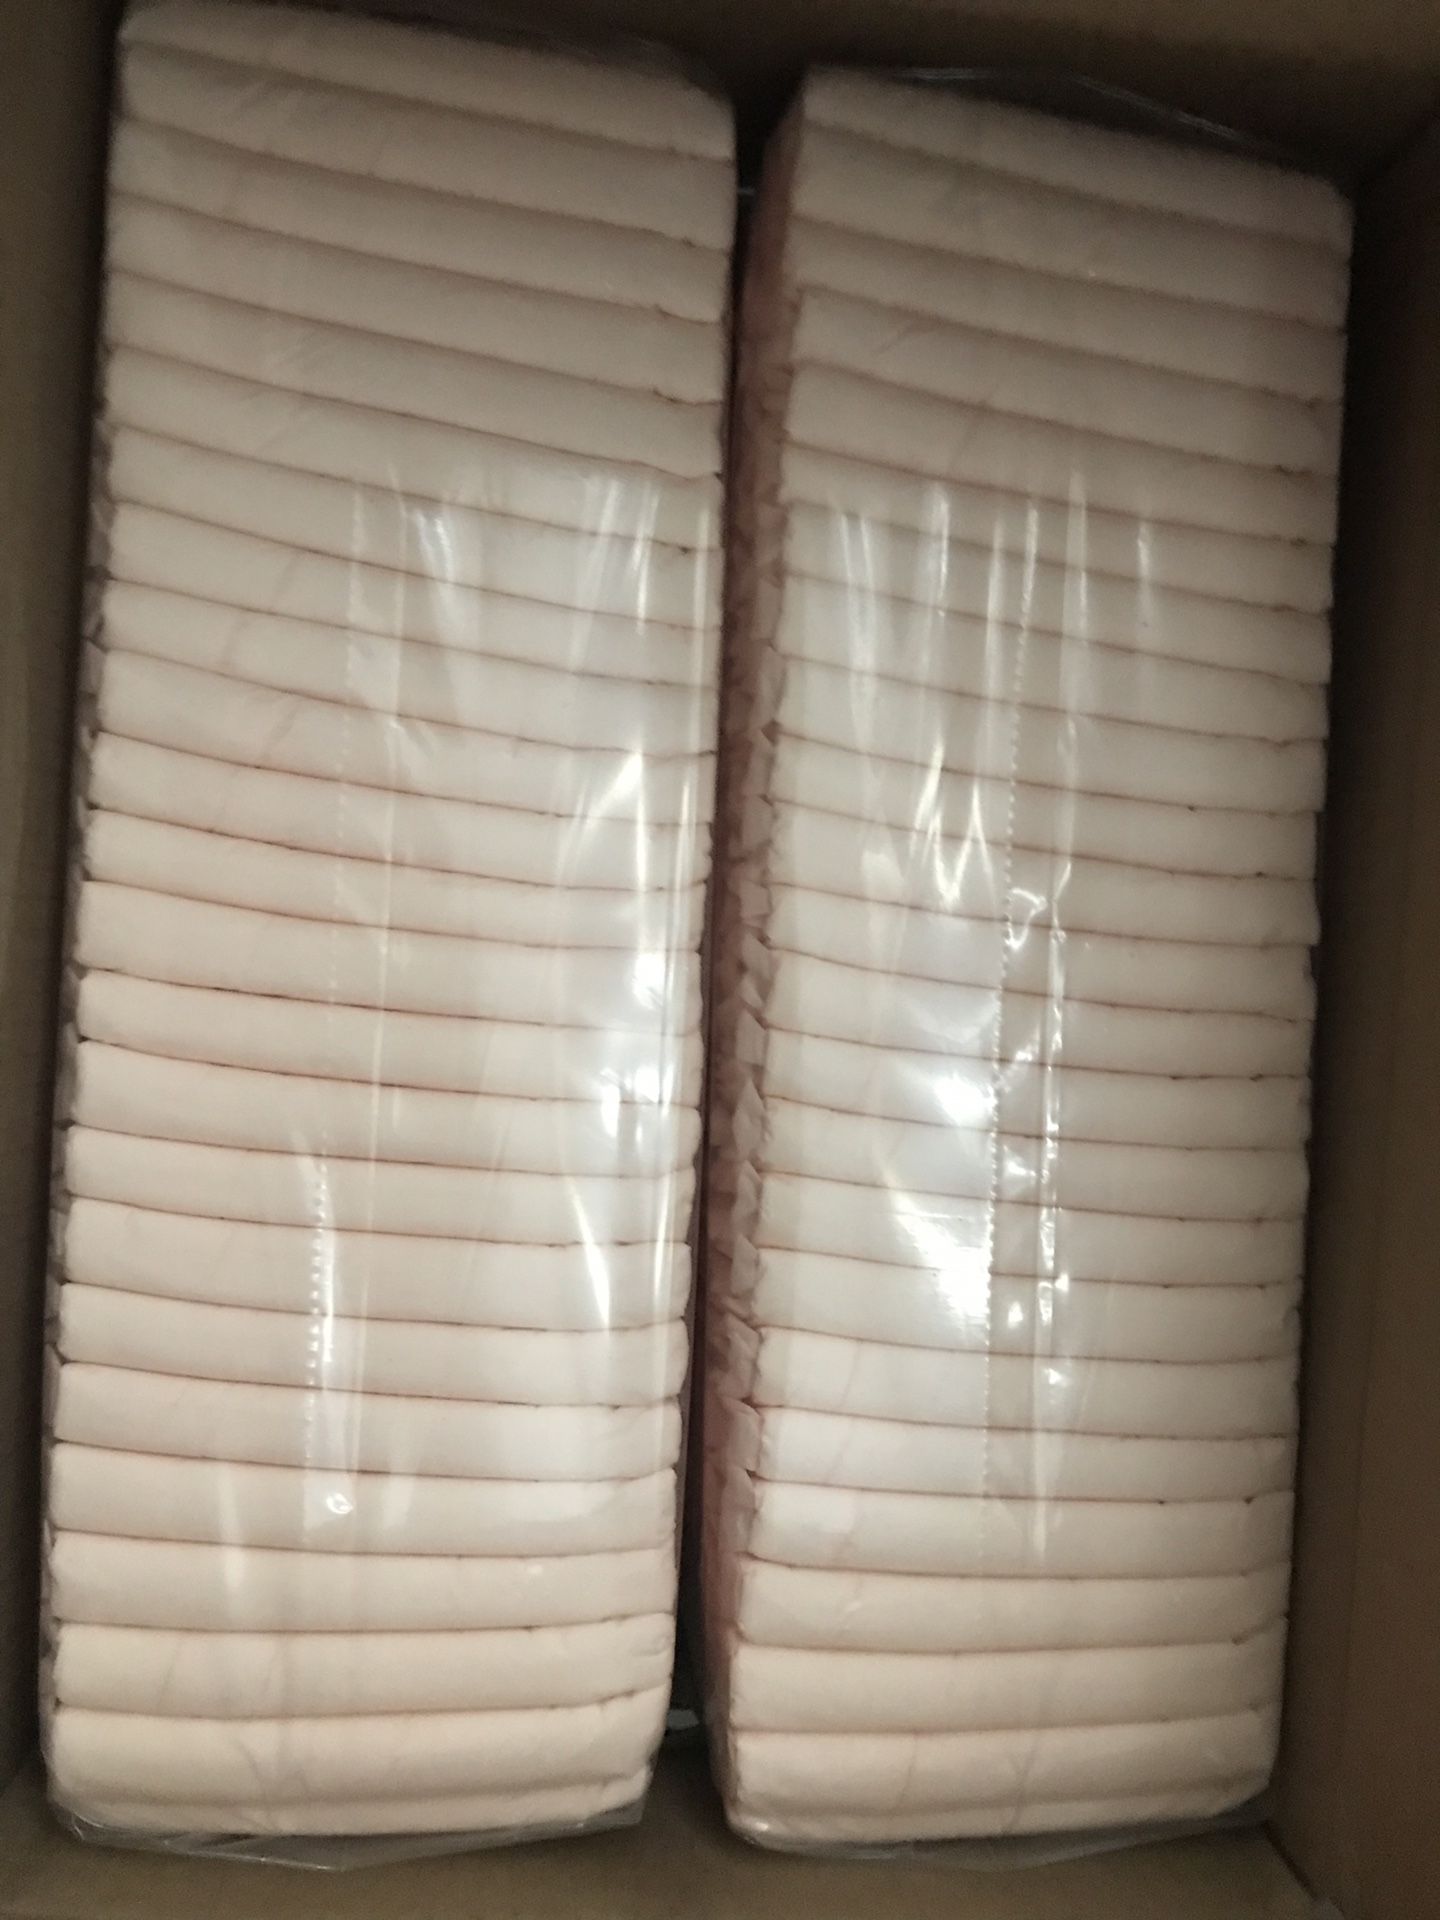 Brand new unopened underpads bedpads